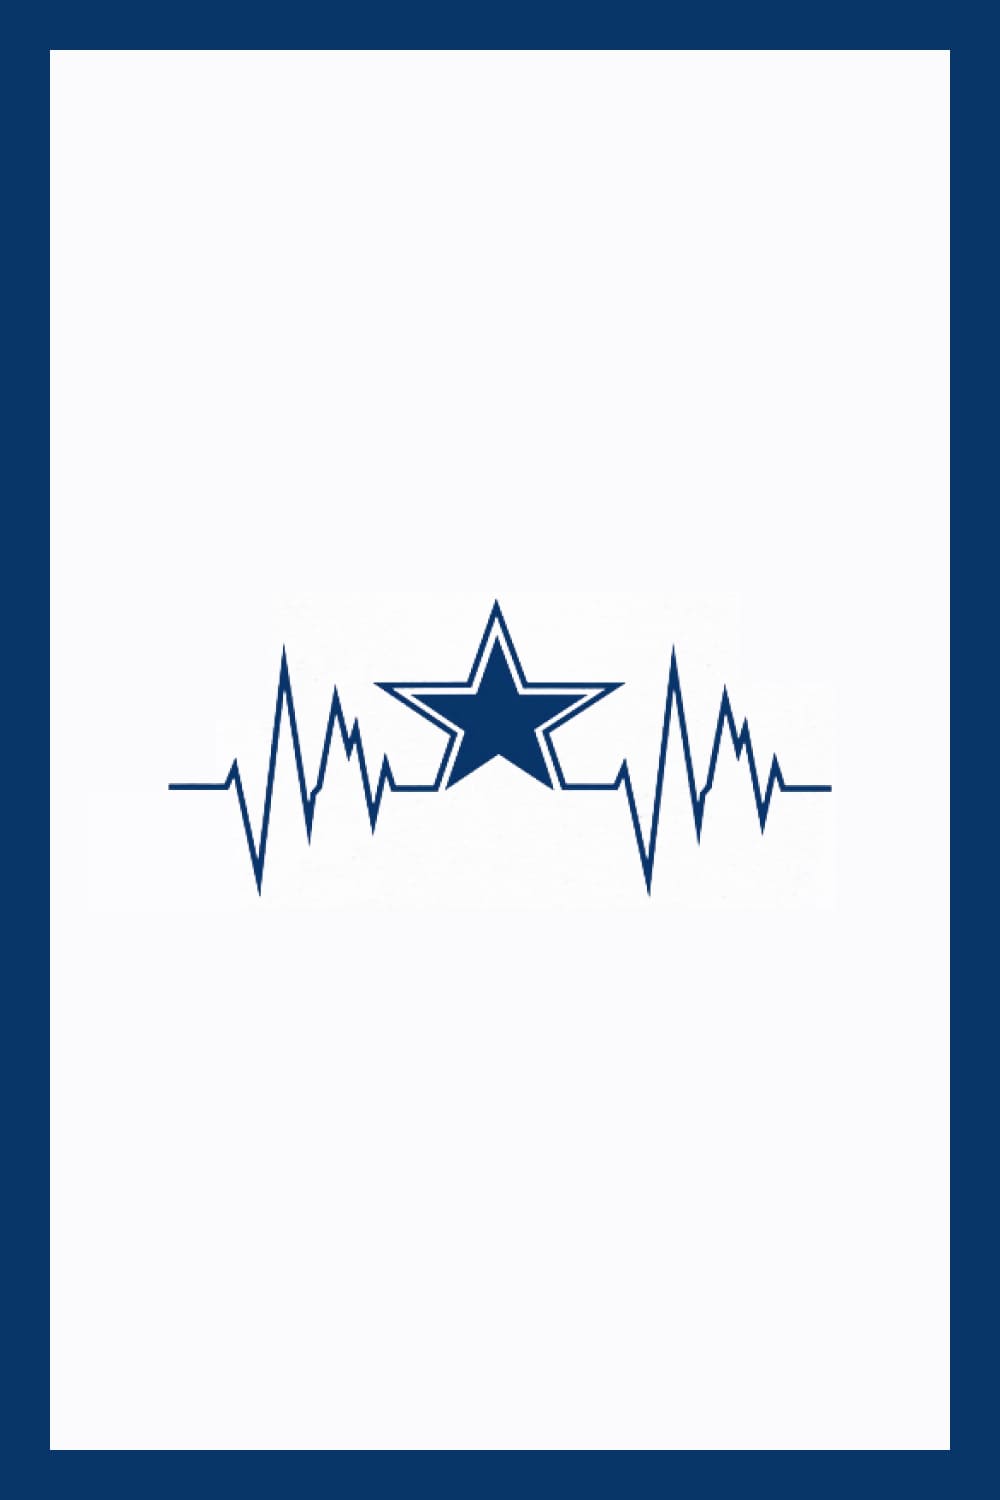 Dallas Cowboys on Twitter FIRST LOOK RandyGregory4 and his star tattoo  in Cowboys gear CowboysDraft Huskers httptcotvcxgyfCaB  Twitter